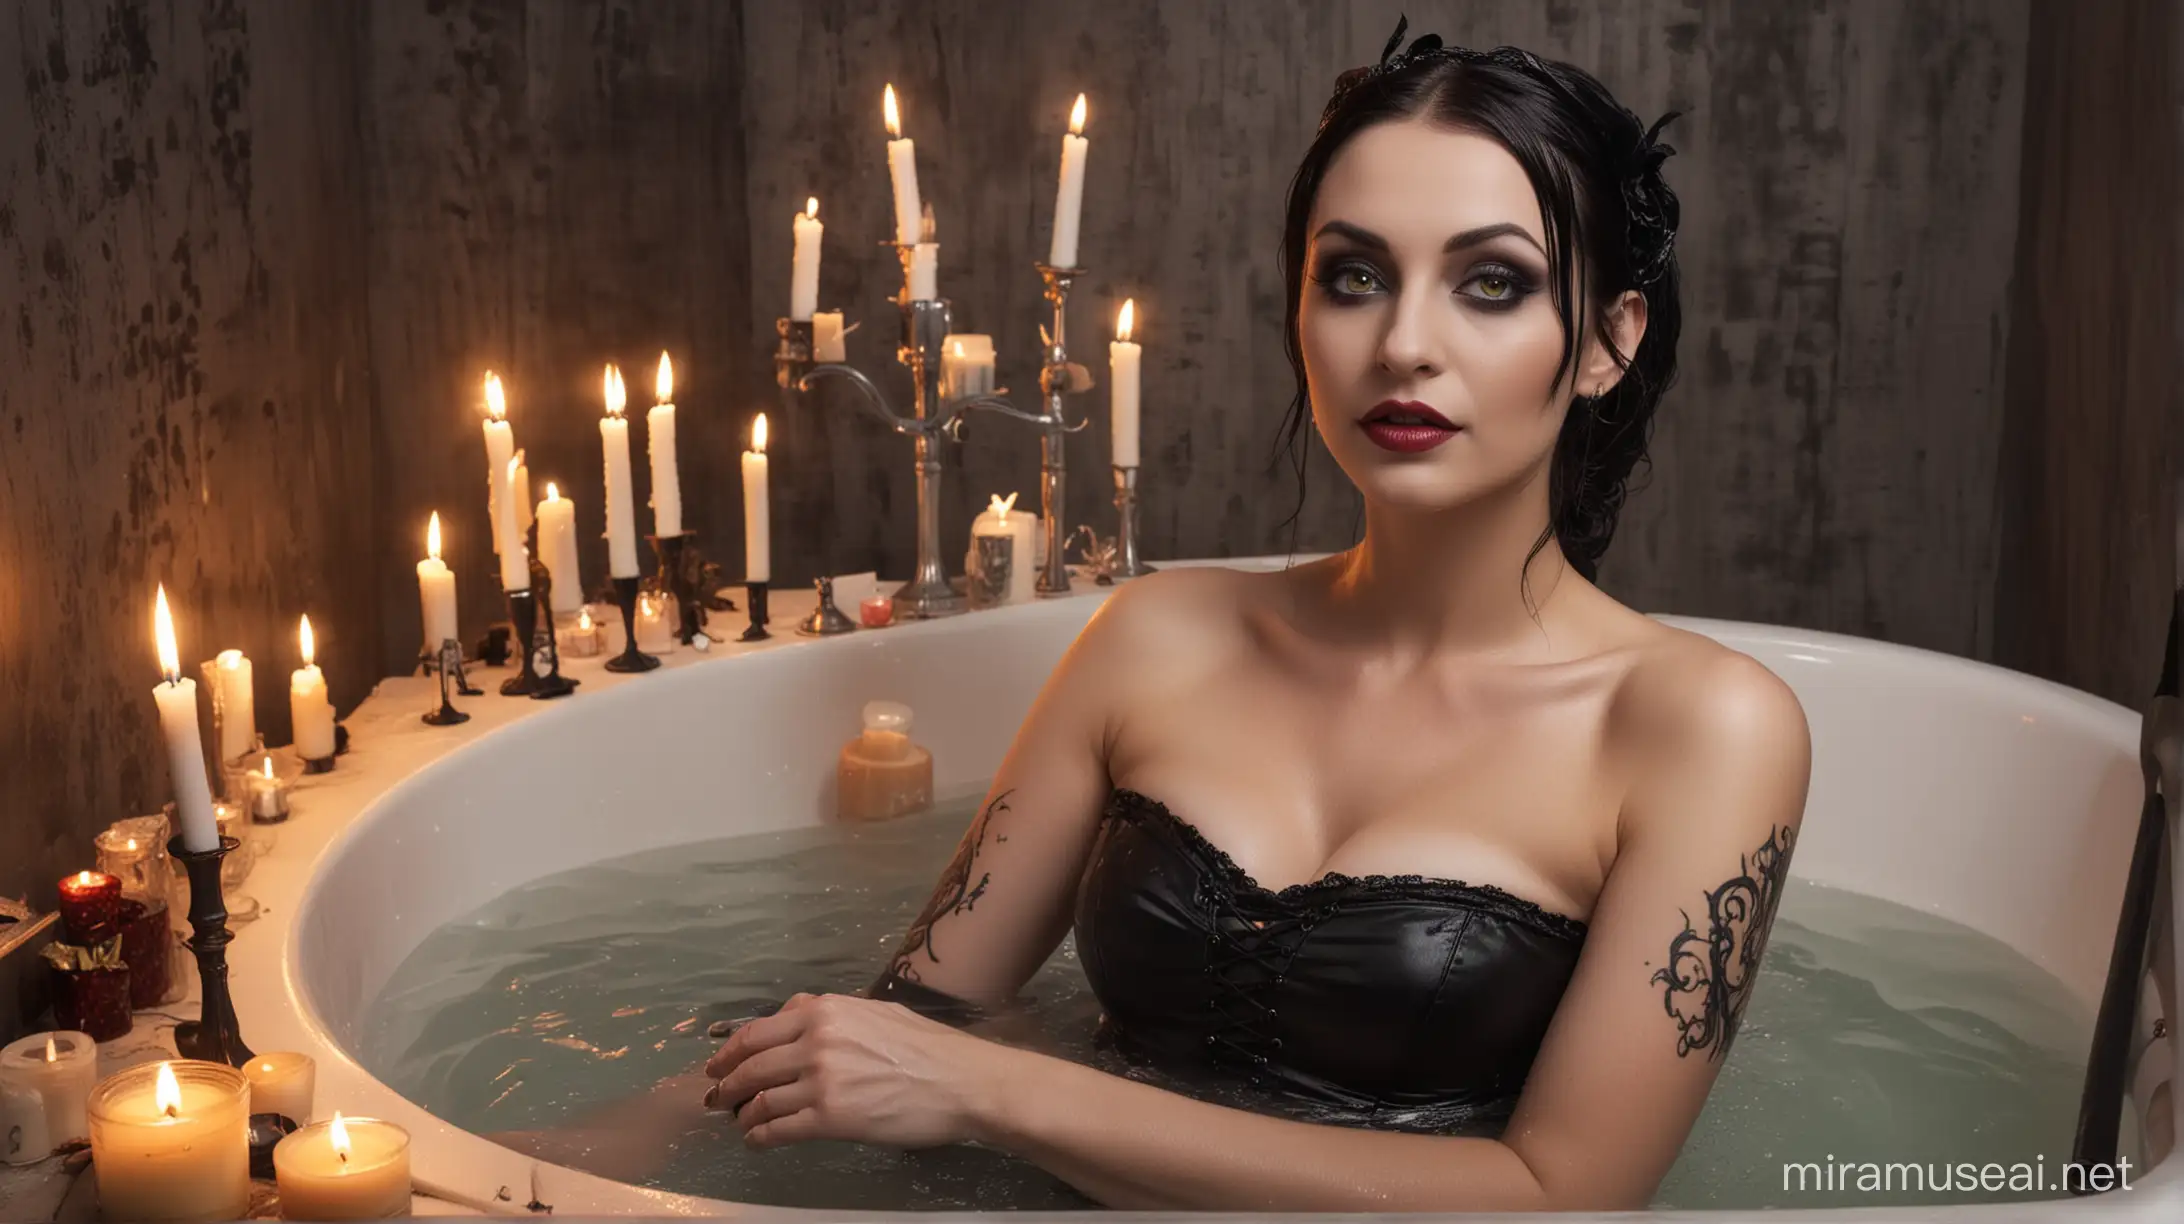 Elegant Gothic Woman Bathing Surrounded by Flickering Candles